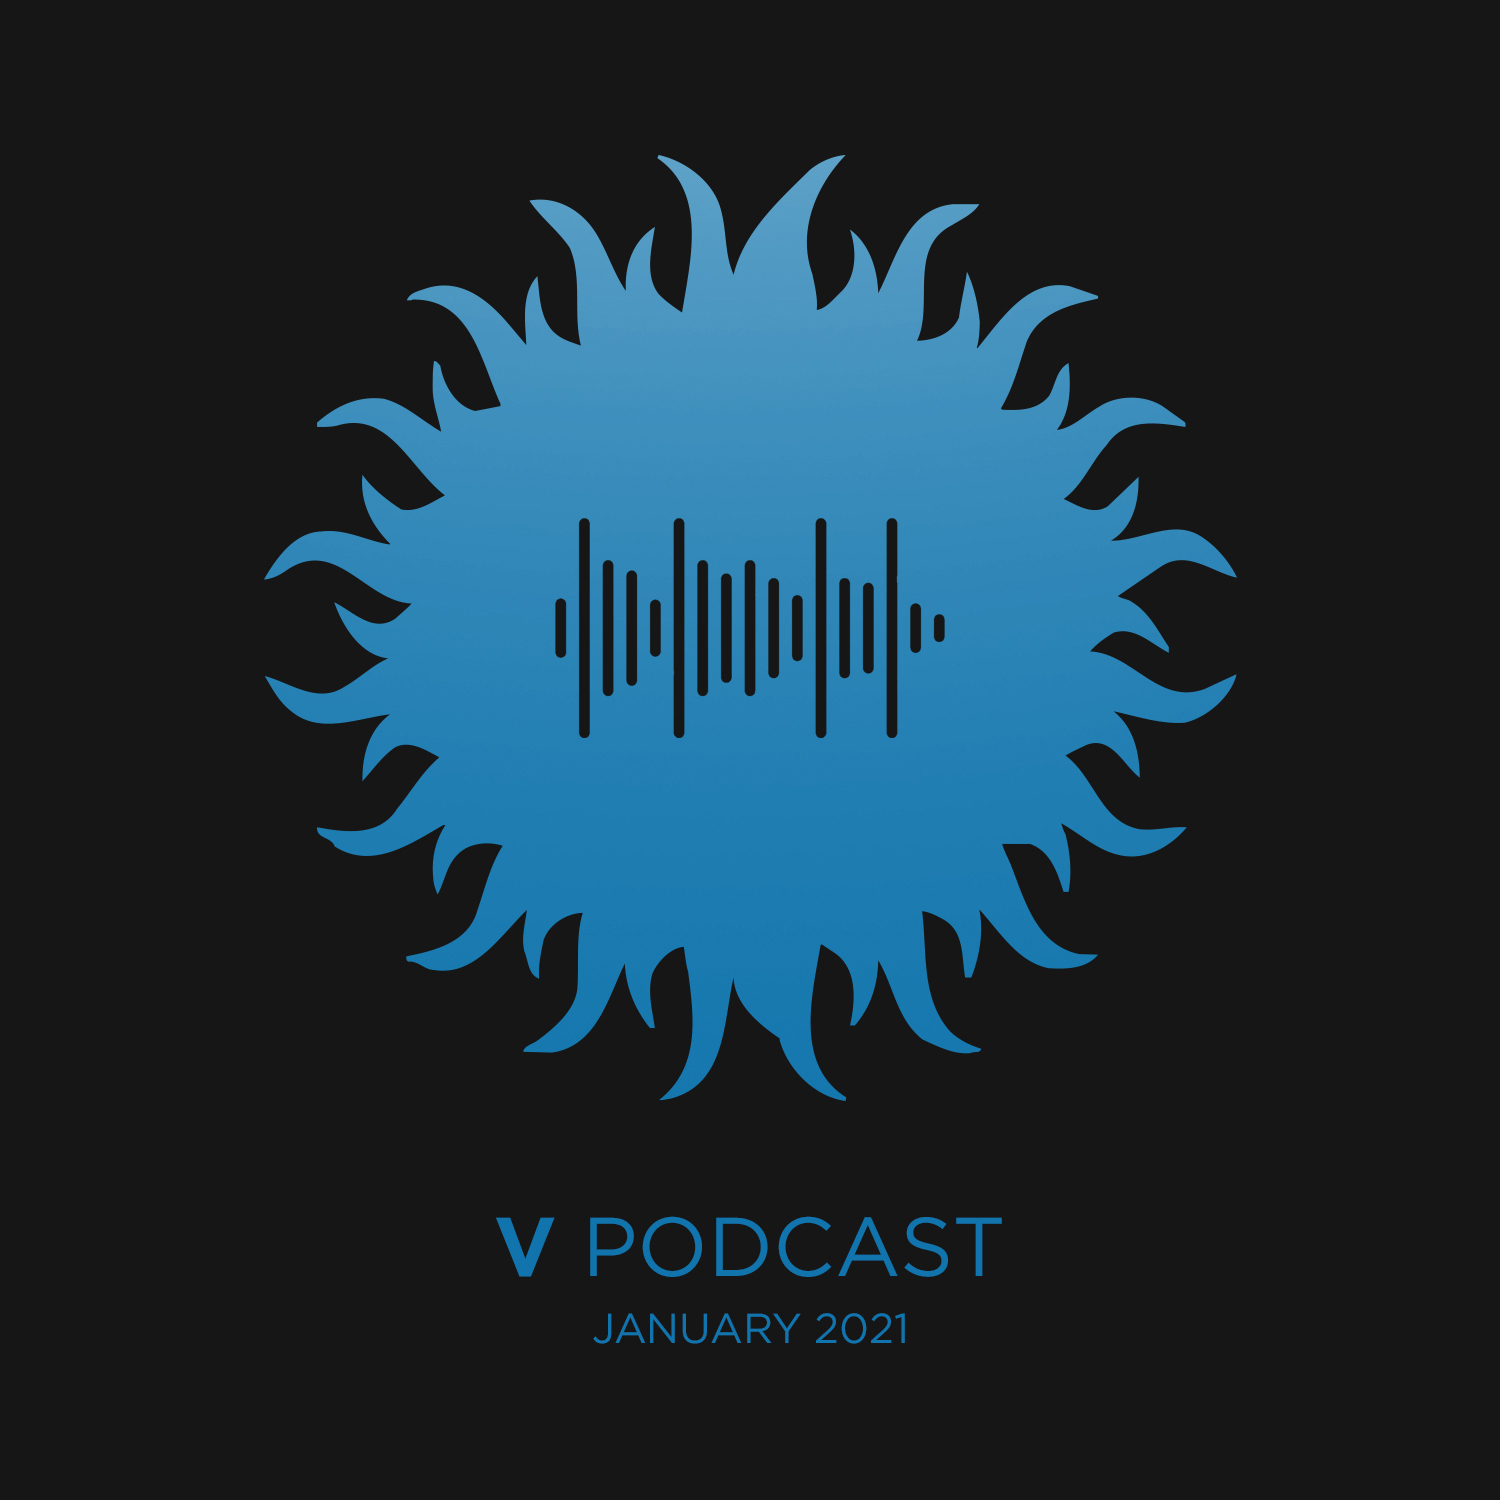 V Podcast 102 - Drum and Bass - Hosted by Bryan Gee Artwork